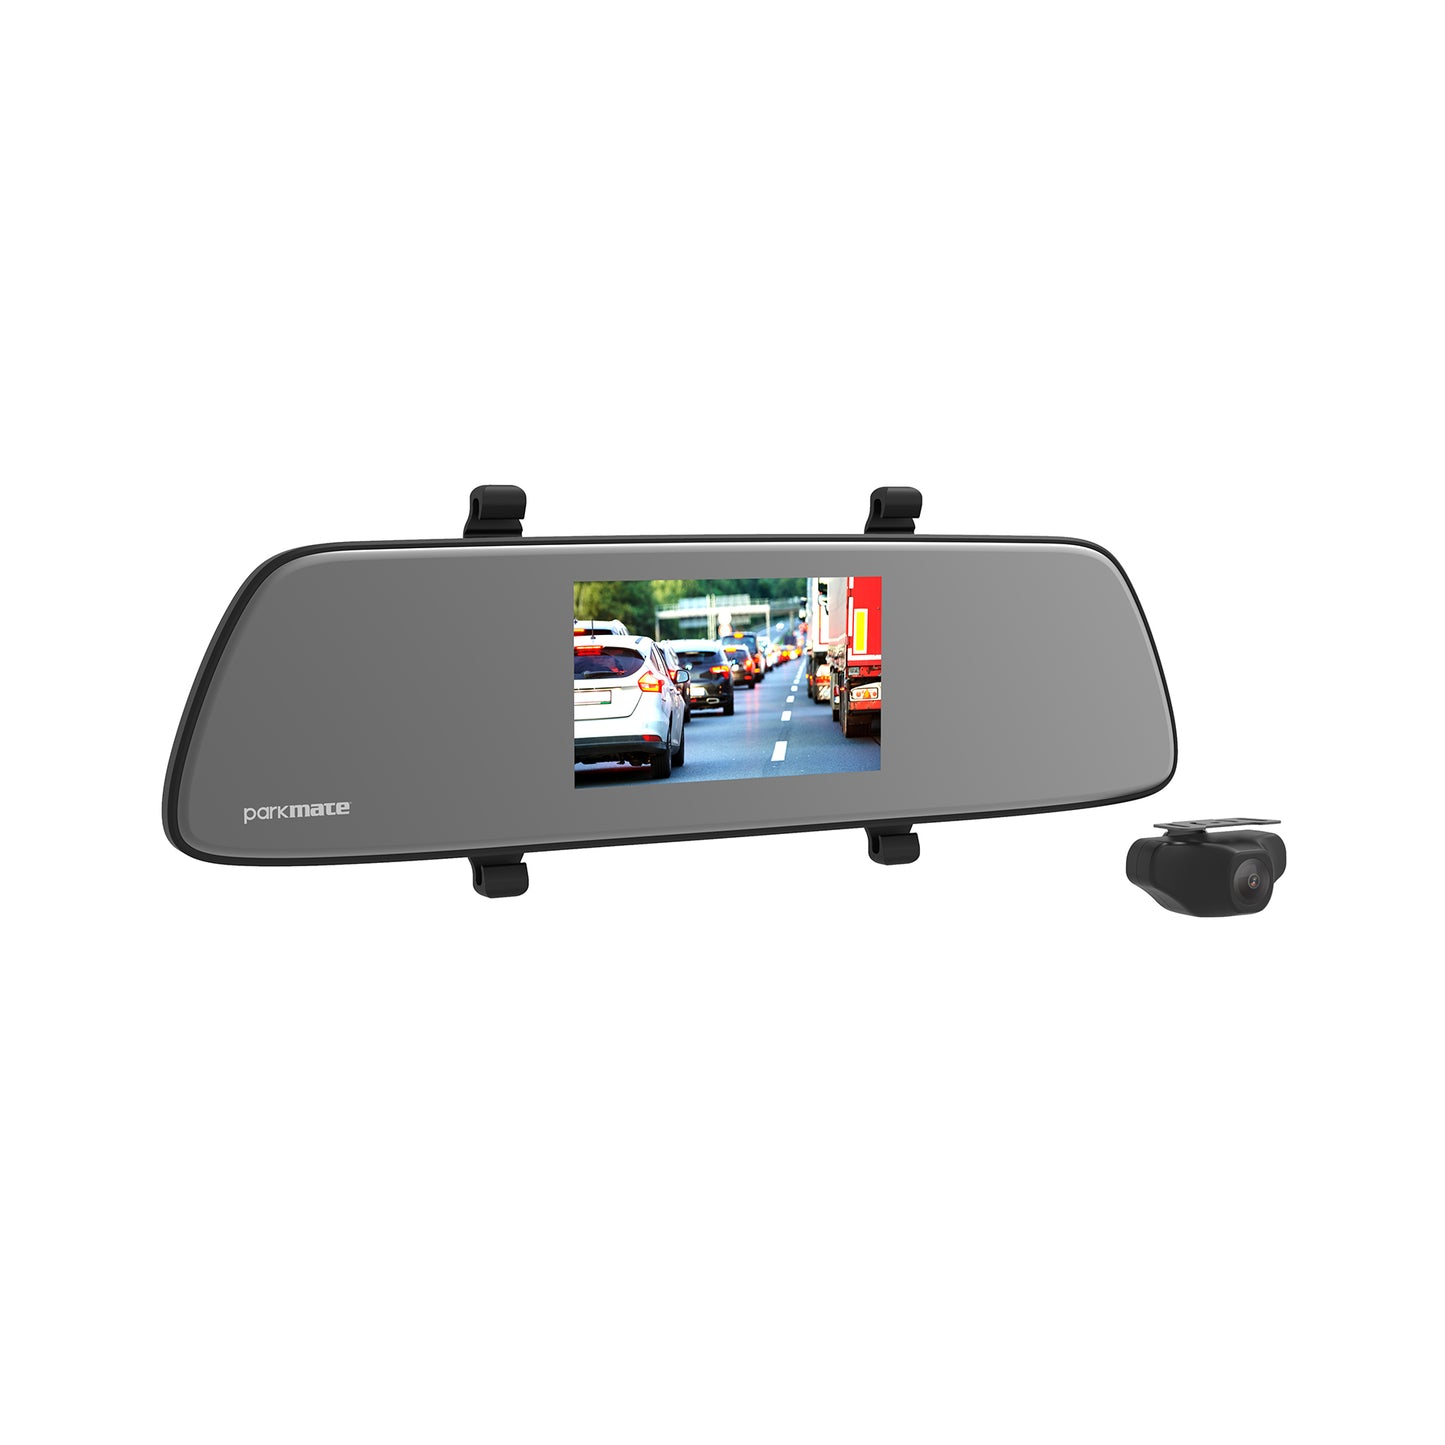 5.0” Touch Screen Mirror DVR with 1080p Front and Rear Recording